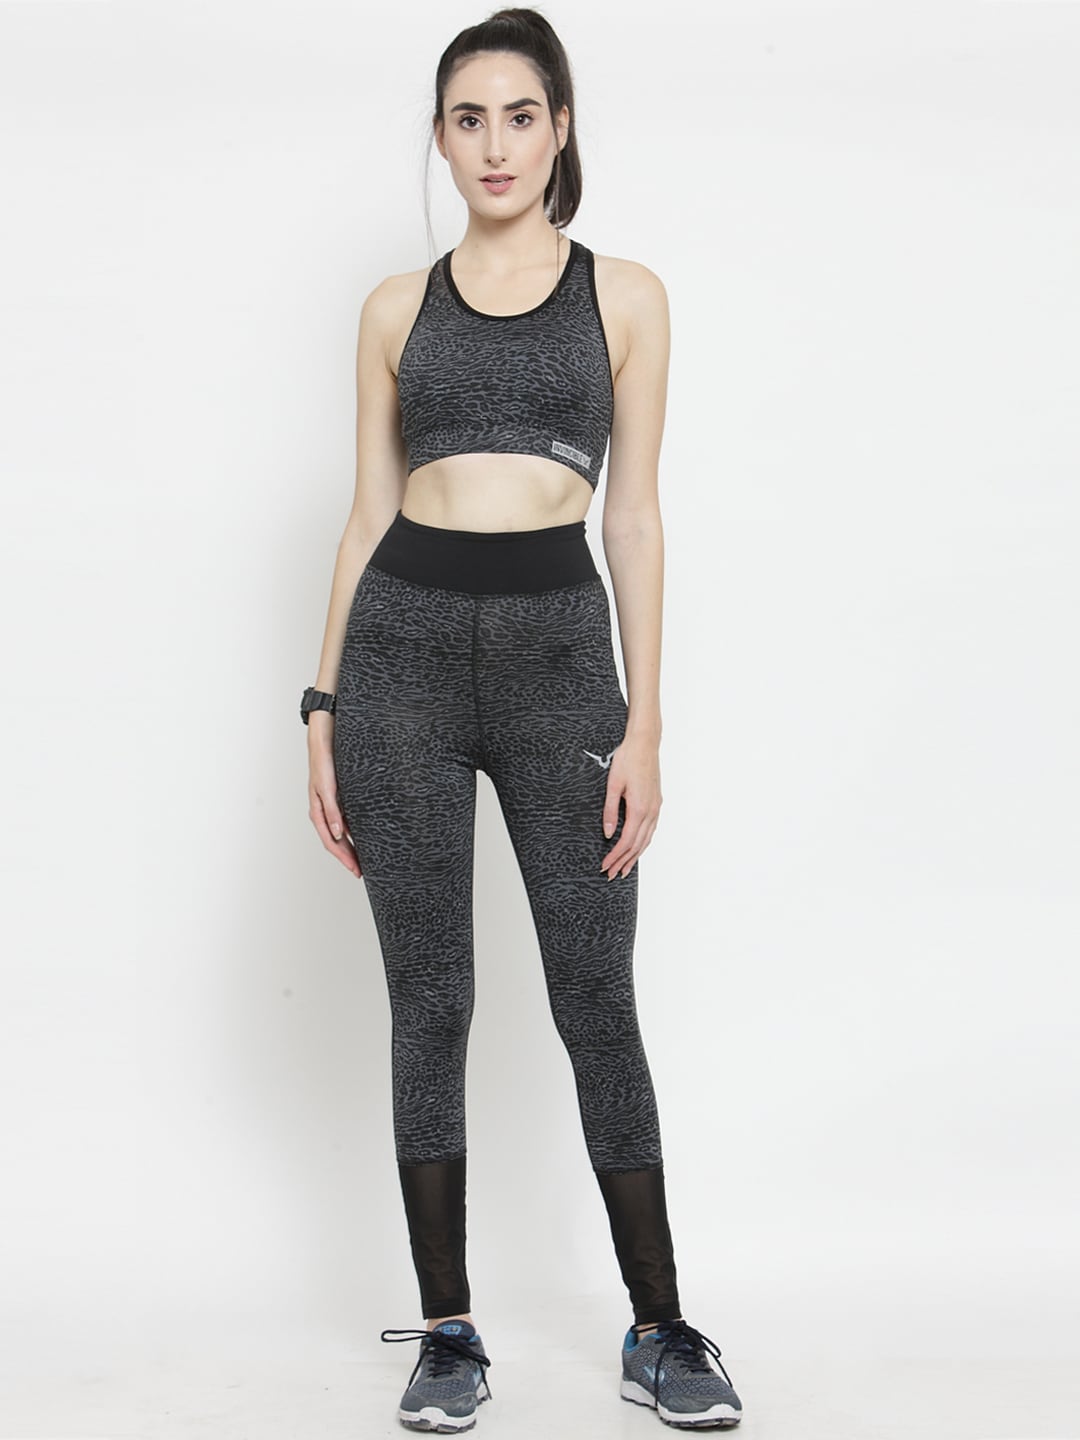 Invincible Women Grey & Black Leopard Print Gym Workout Co-Ordinates Price in India